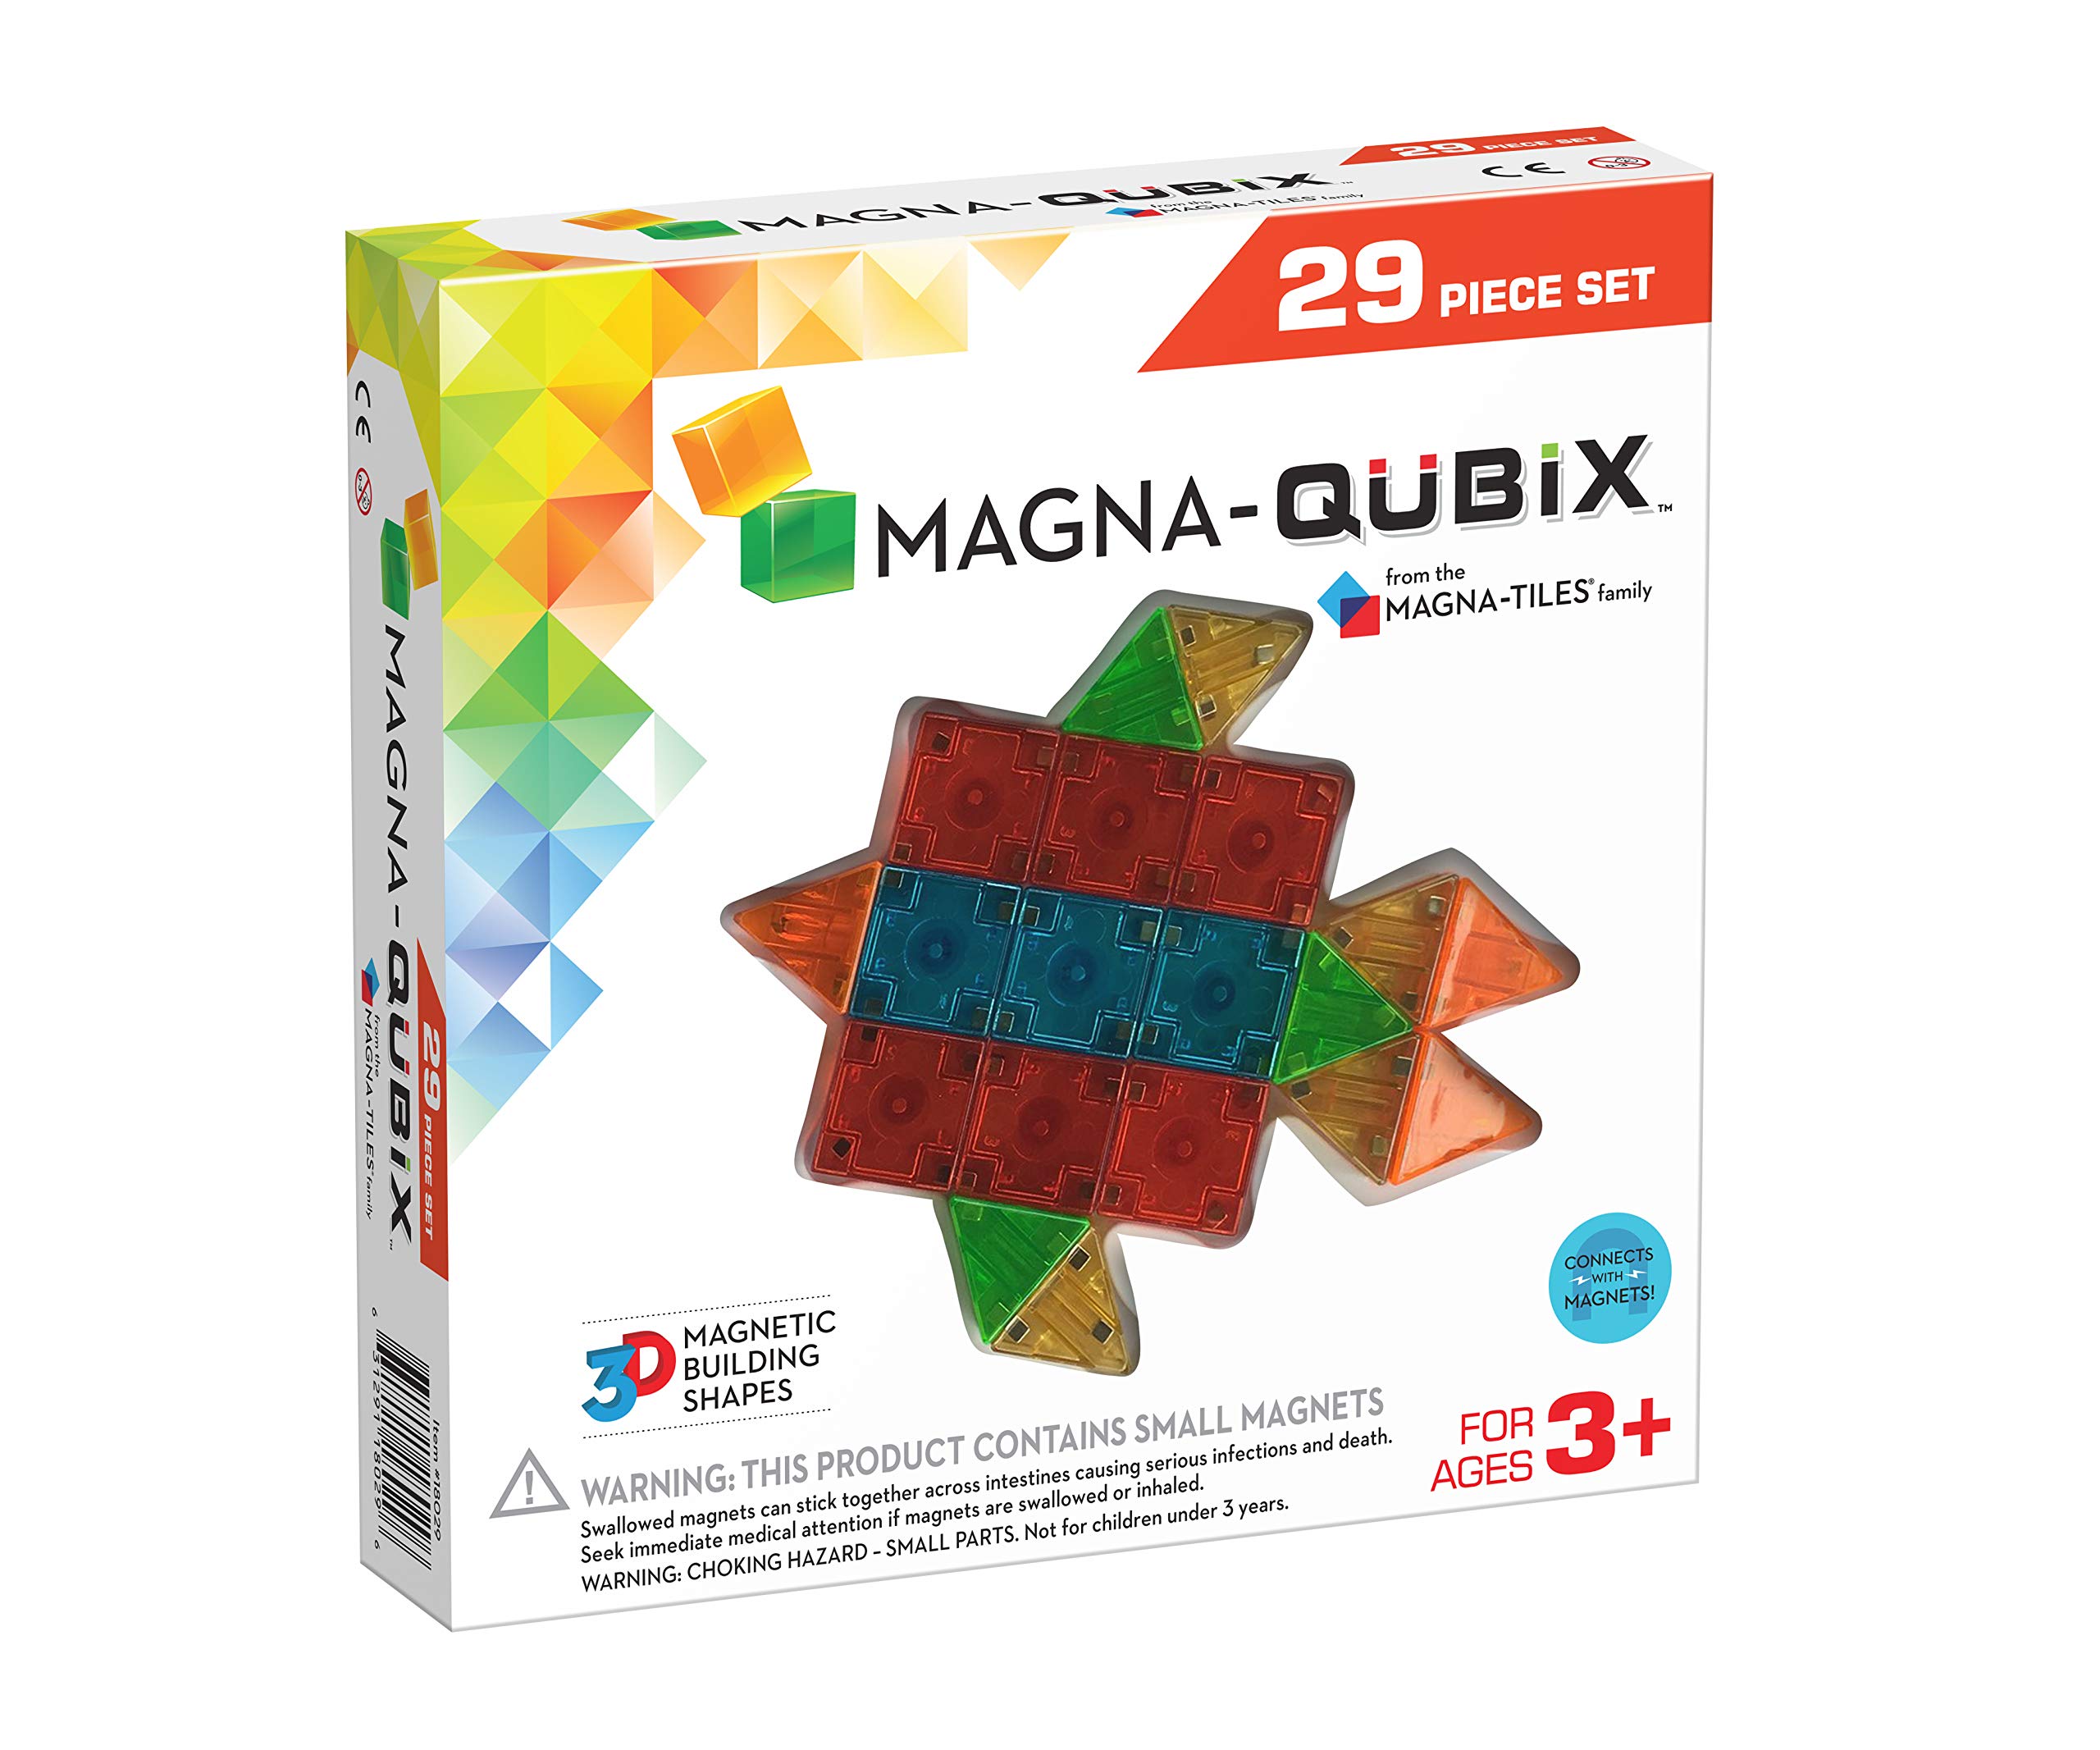 Magna-Qubix 29-Piece Clear Colors Set - The Original, Award-Winning Magnetic 3D Building Shapes - Creativity and Educational - STEM Approved